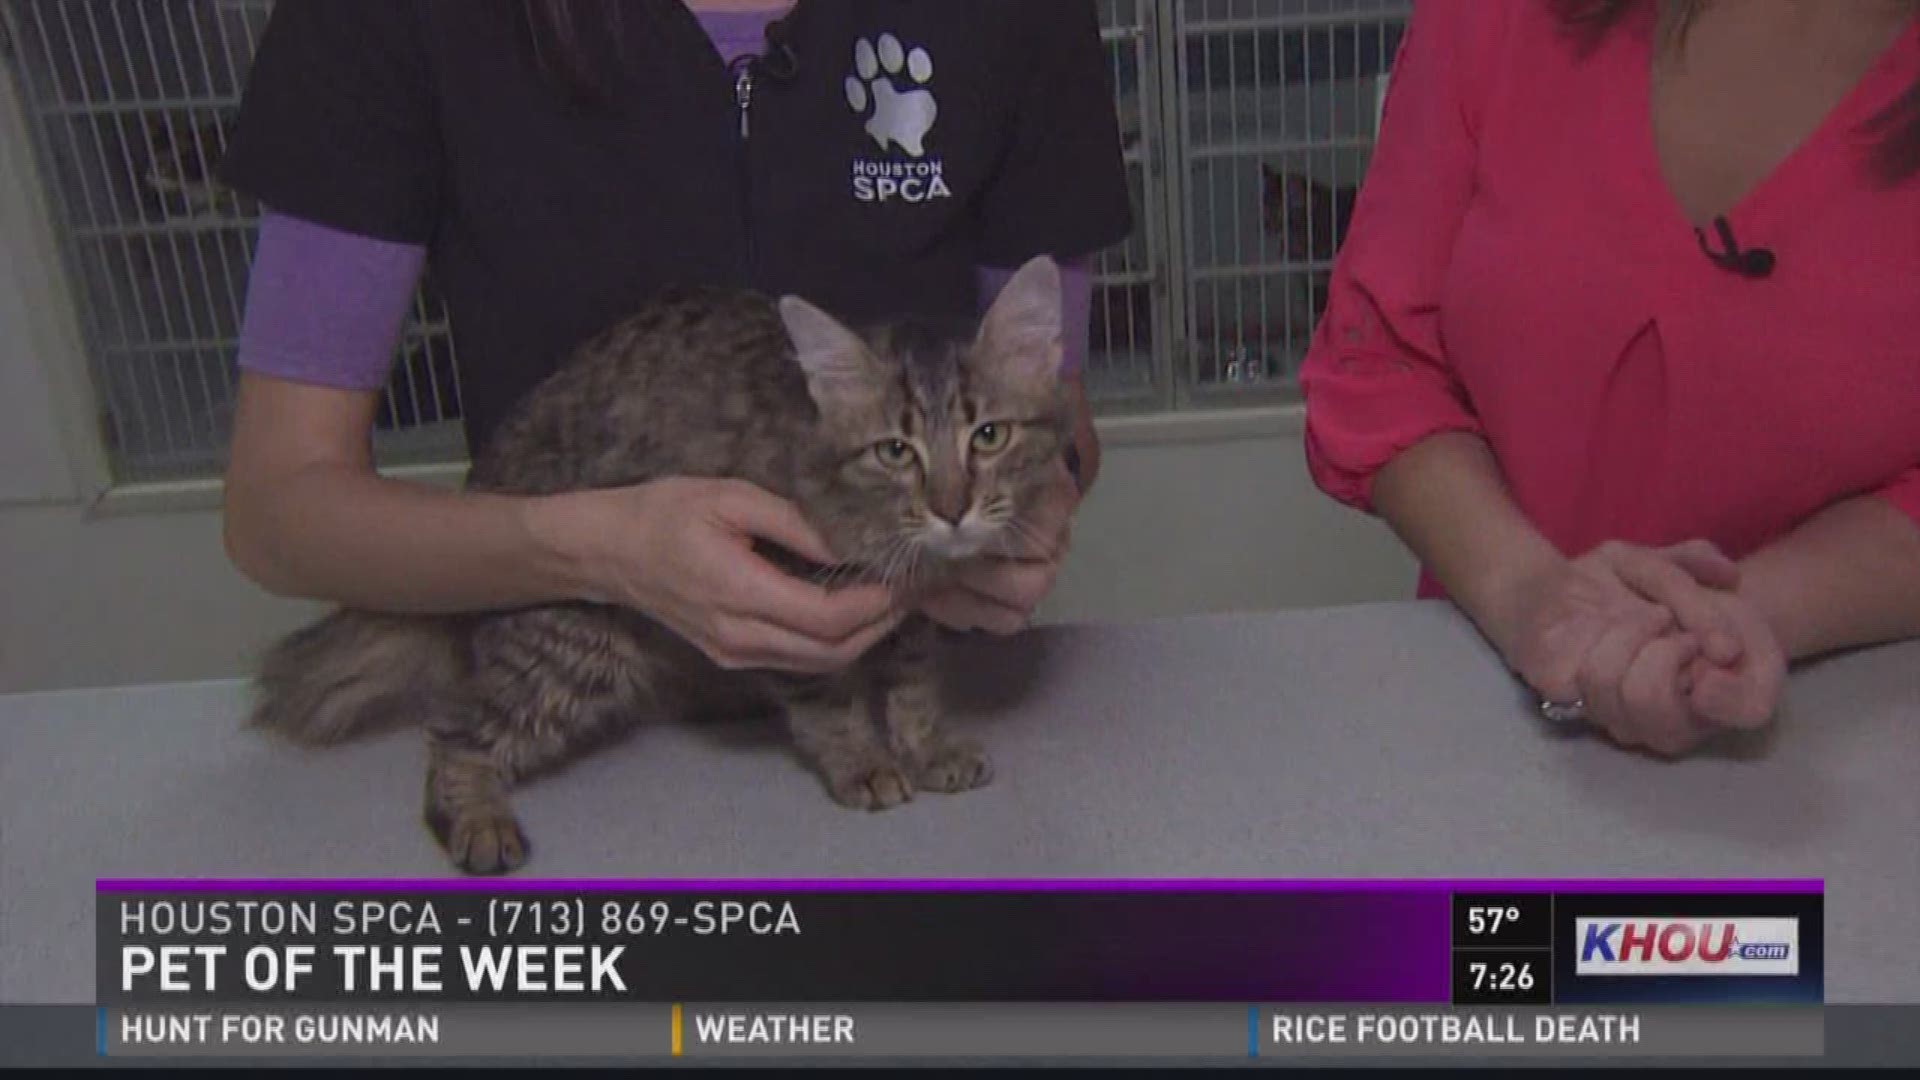 Meghan, a fluffy 6-month-old cat, is ready for adoption at the Houston SPCA.